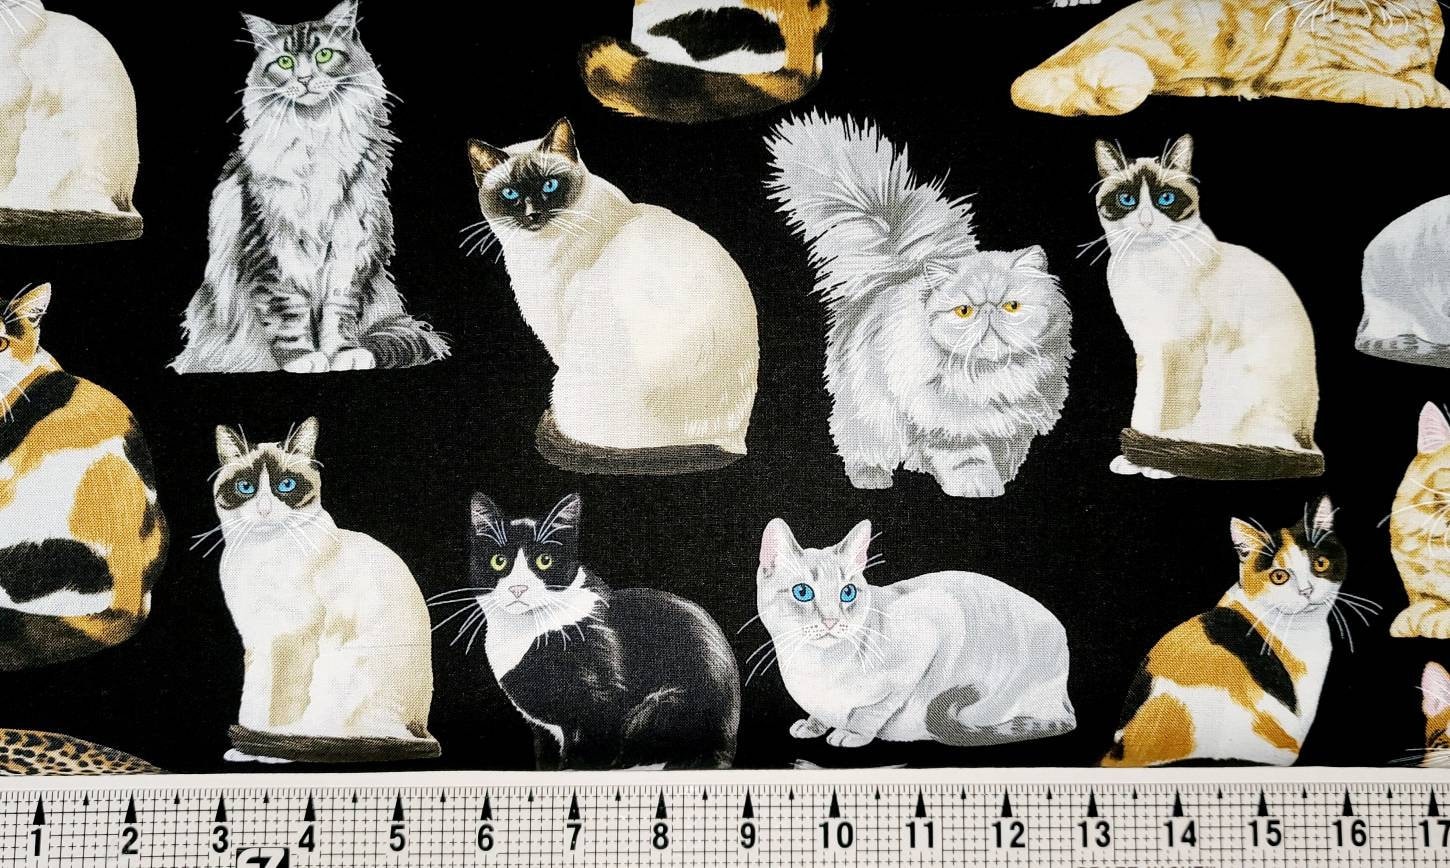 The Louis Vuitton New Purr-fect Collection Showcases the Designer's Own Cats